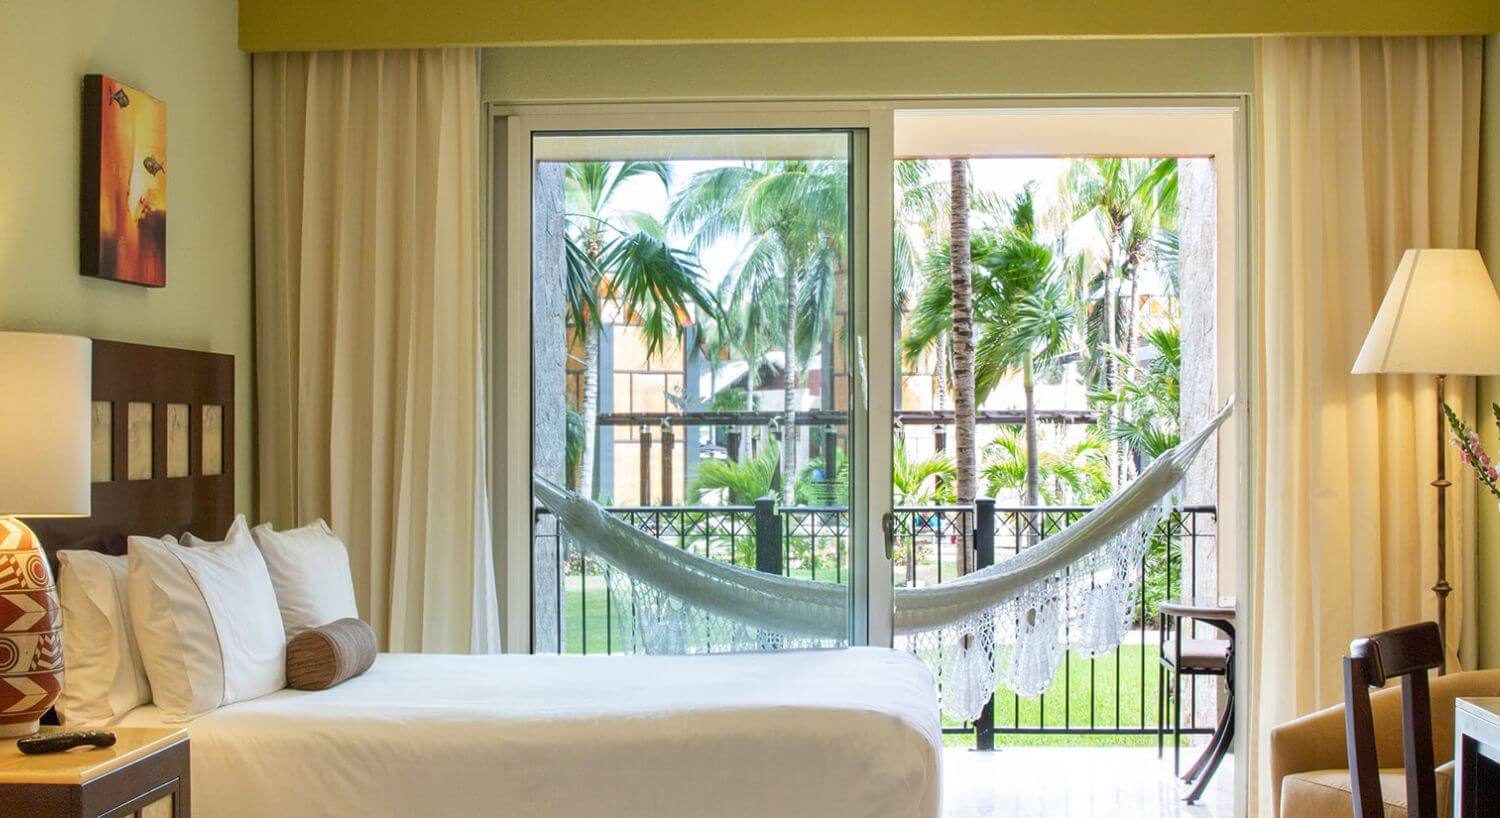 A bedroom with a bed with white bedding, nightstand with lamp, a desk and chair, a plush armchair and floor lamp in the corner, and sliding doors open to a private terrace with patio furniture, a hammock, and resort views with green grass and palm trees.